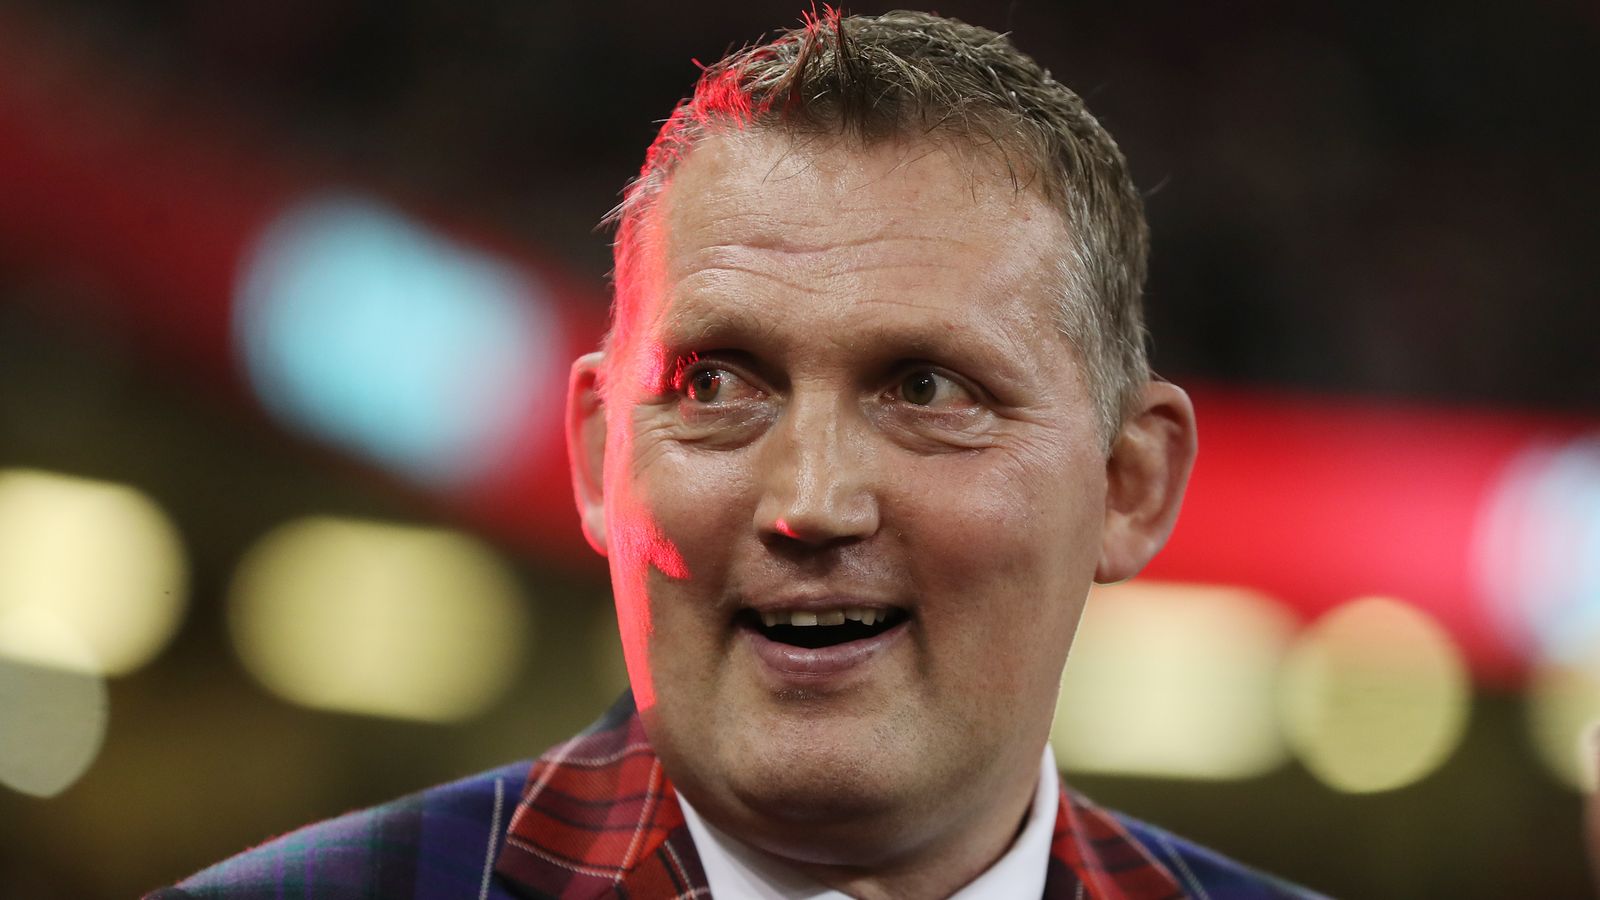 Motor neurone disease cure 'possible' in future as ambitious strategy by Doddie Weir's charity provides 'crucial' funding